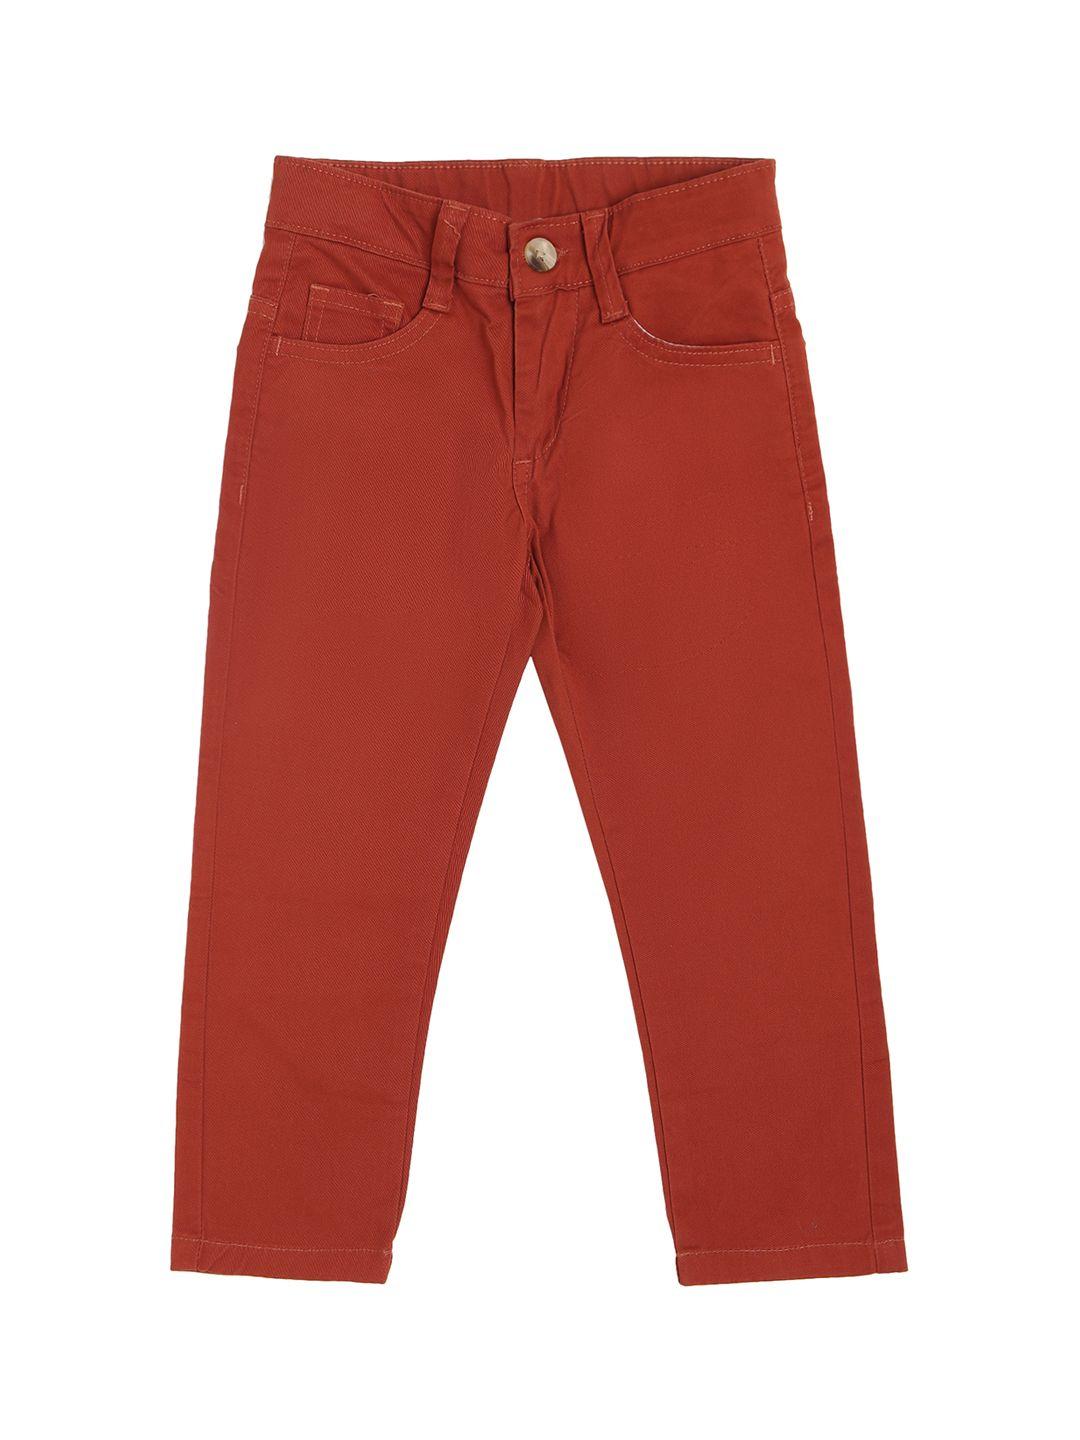 Cantabil Boys Cotton Chinos Trousers